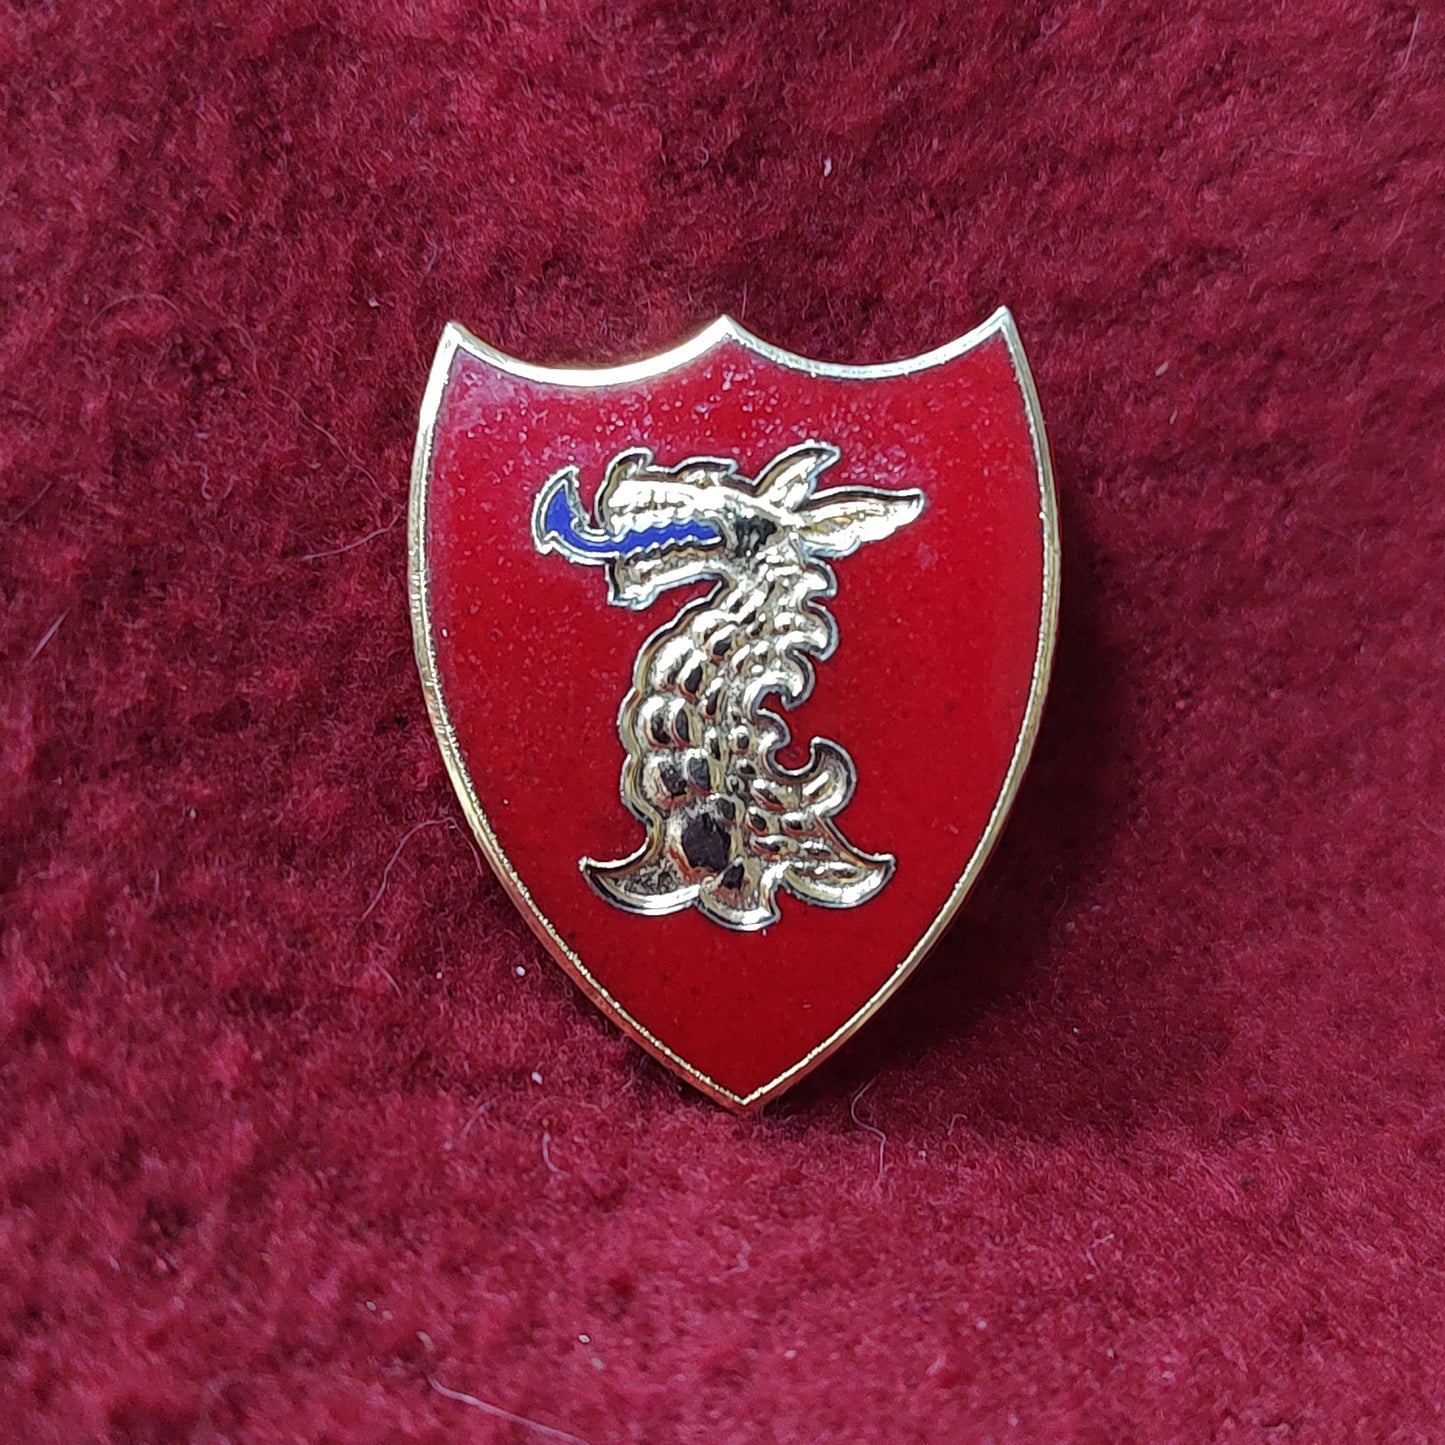 VINTAGE US Army 114th FIELD ARTILLERY Unit Crest Pin (11o36)